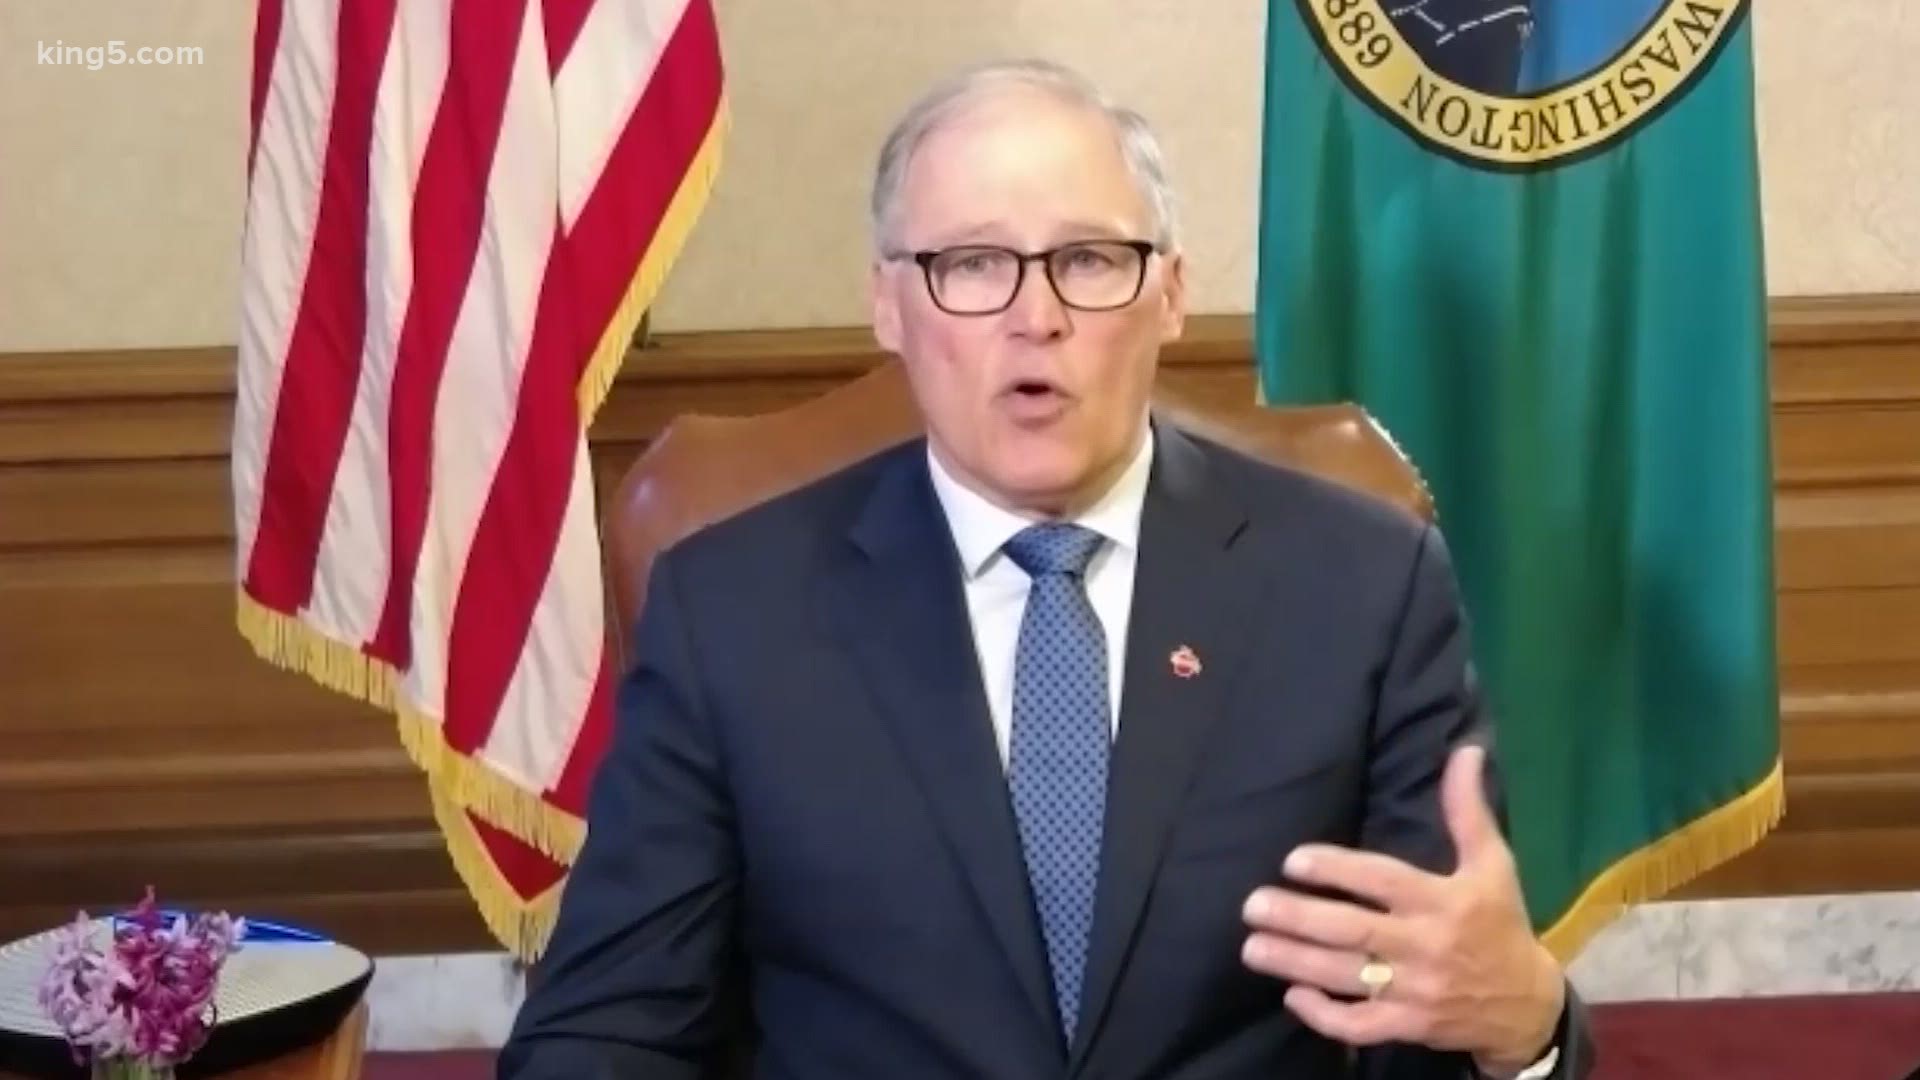 In an exclusive interview with KING 5, Gov. Jay Inslee discusses keeping kids on remote learning, and when we could be gathering in large groups again.